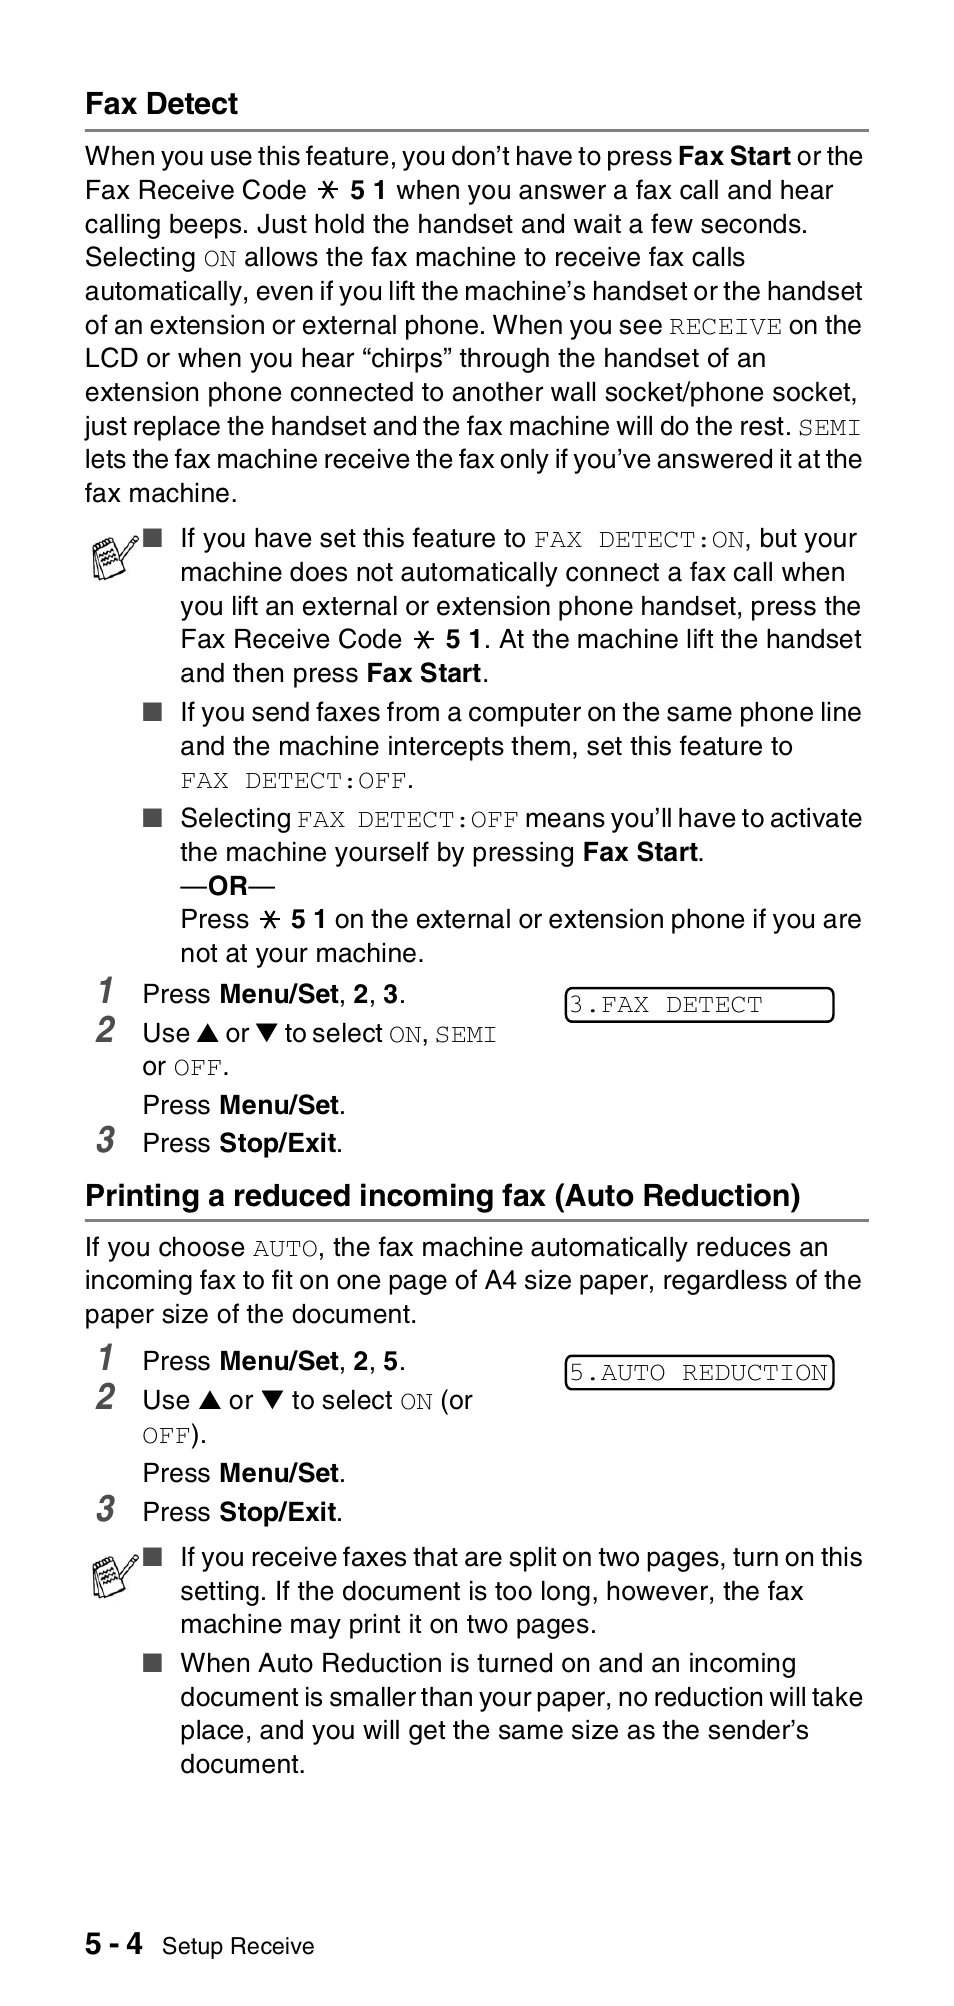 Fax detect, Printing a reduced incoming fax (auto reduction) | Brother FAX- T104 Series User Manual | Page 44 / 120